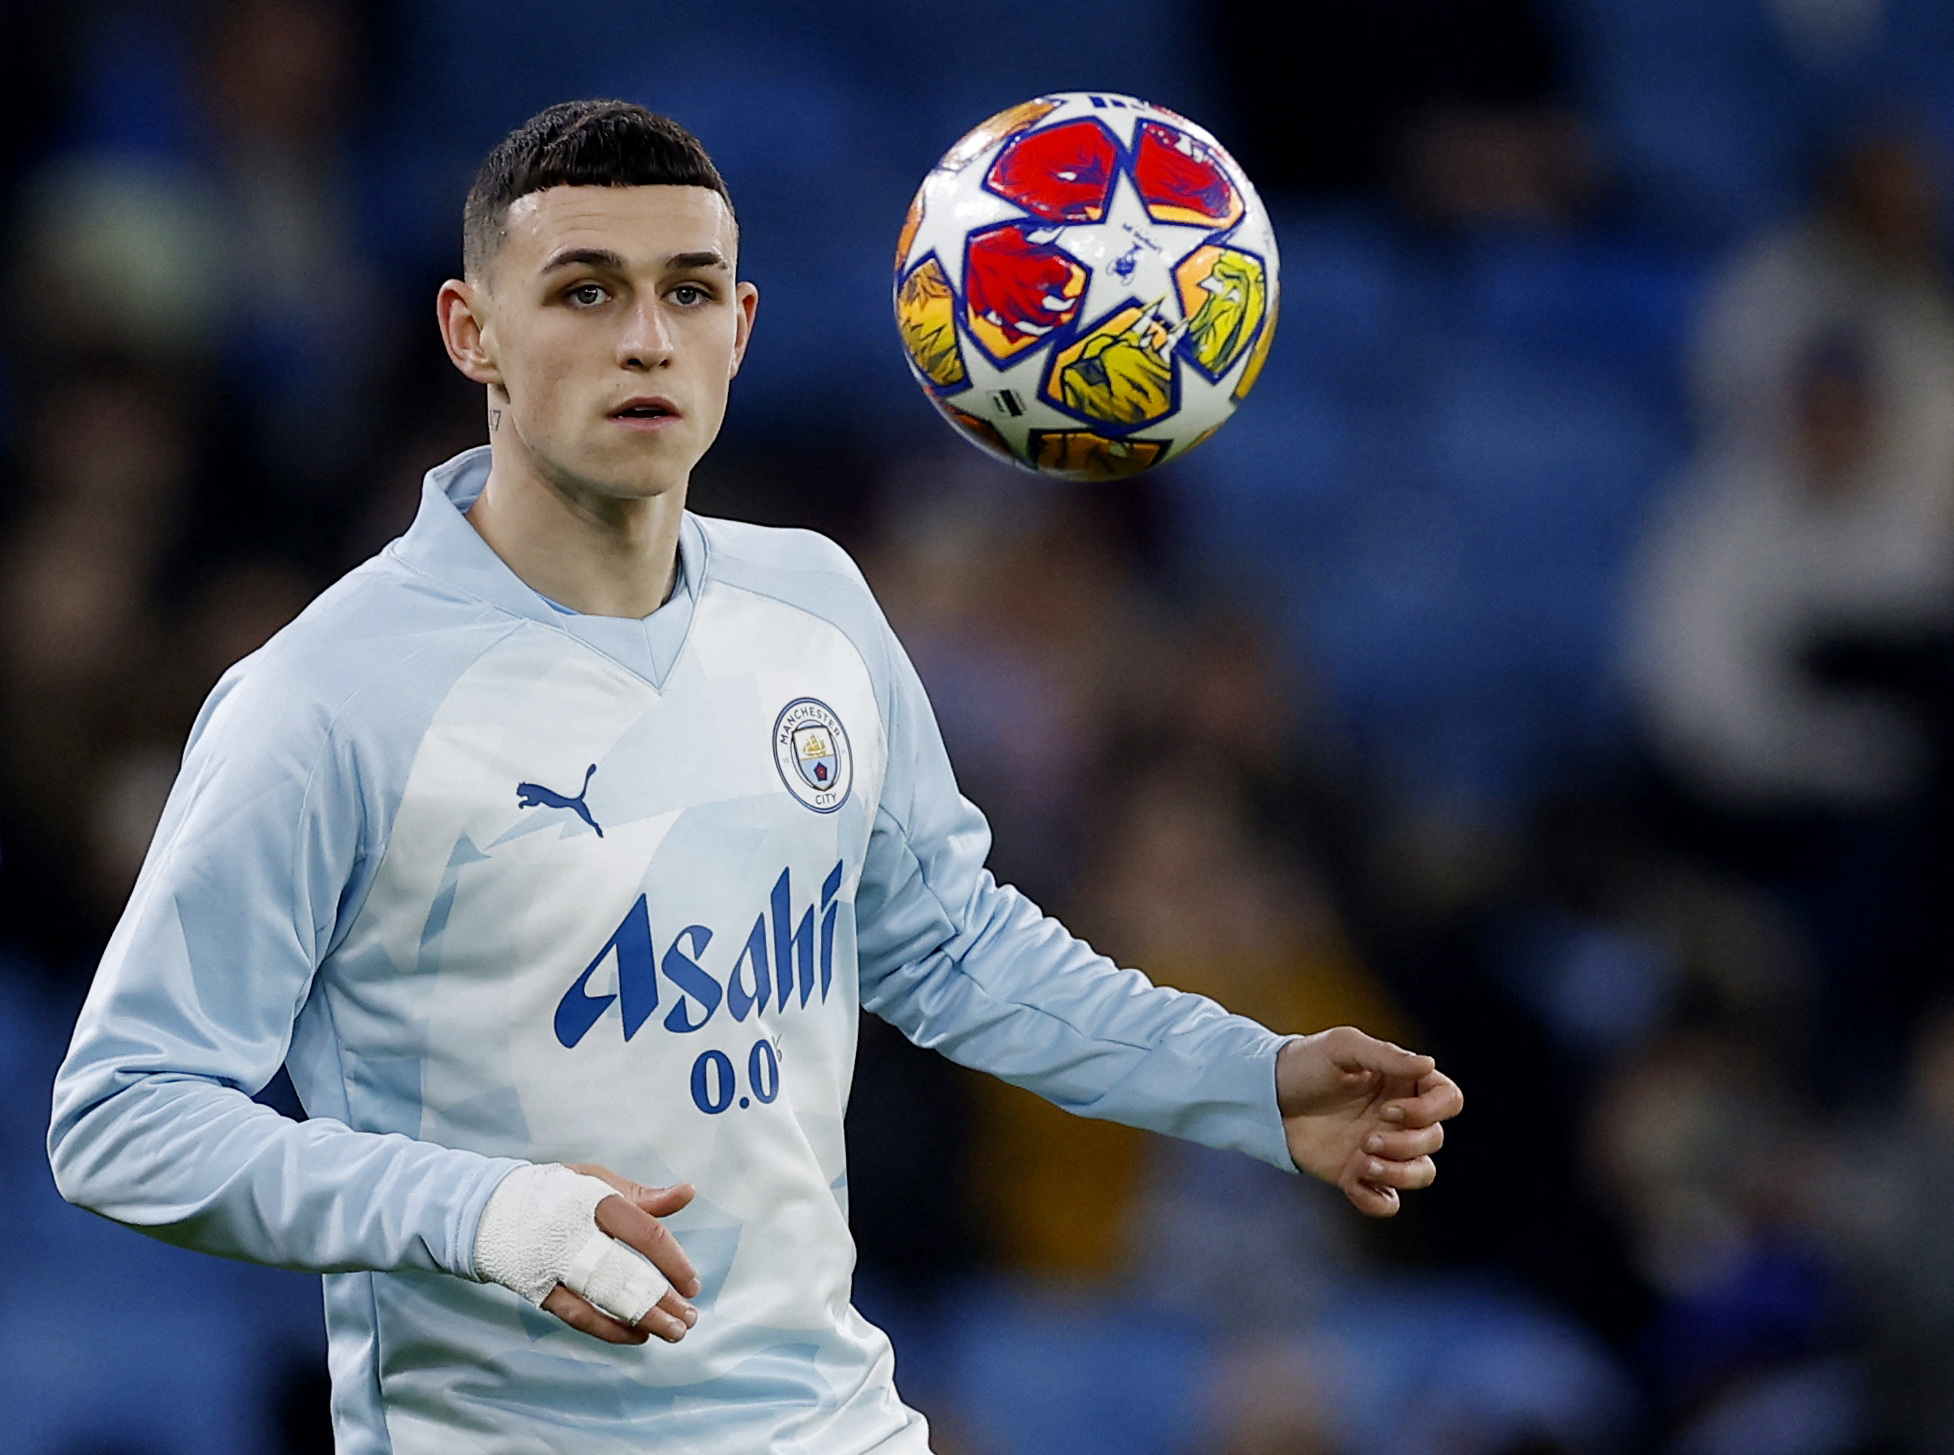 Phil Foden has been this season's best player, says Harry Redknapp